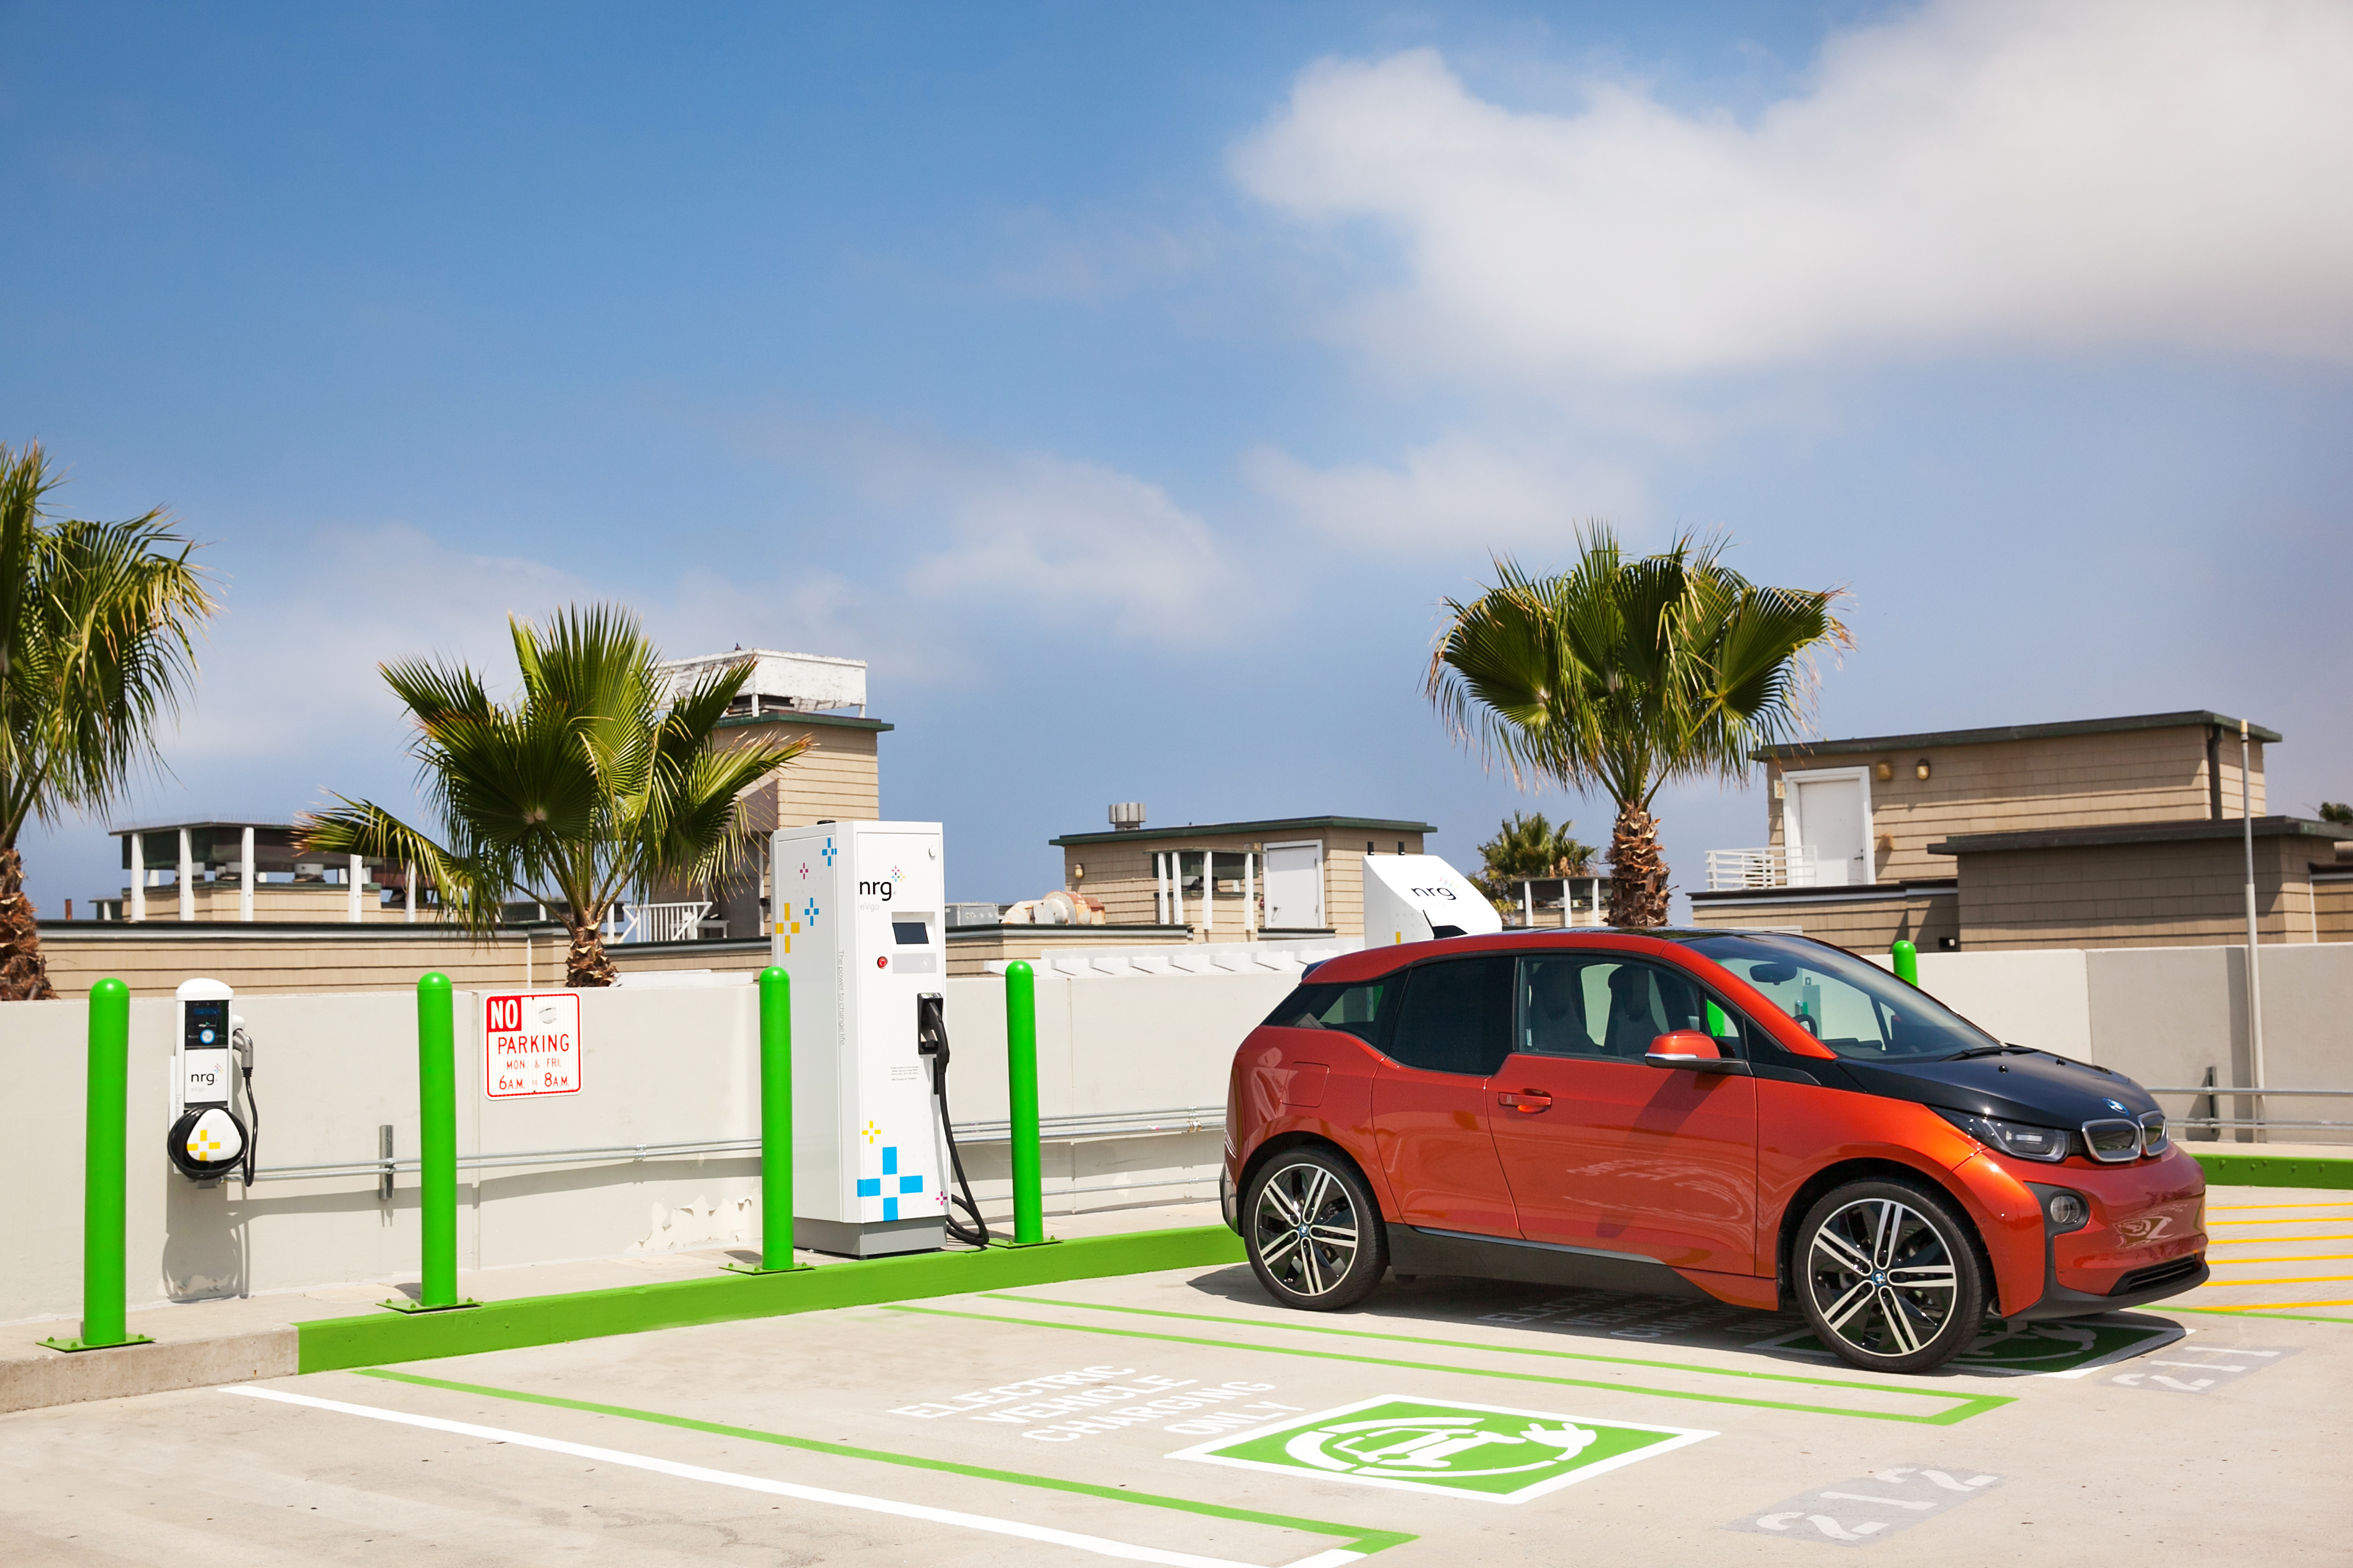 Public-Private Partnership between City of Hermosa Beach and NRG eVgo  Brings New Electric Car Fast-Charging Station to Popular California Beach  Destination